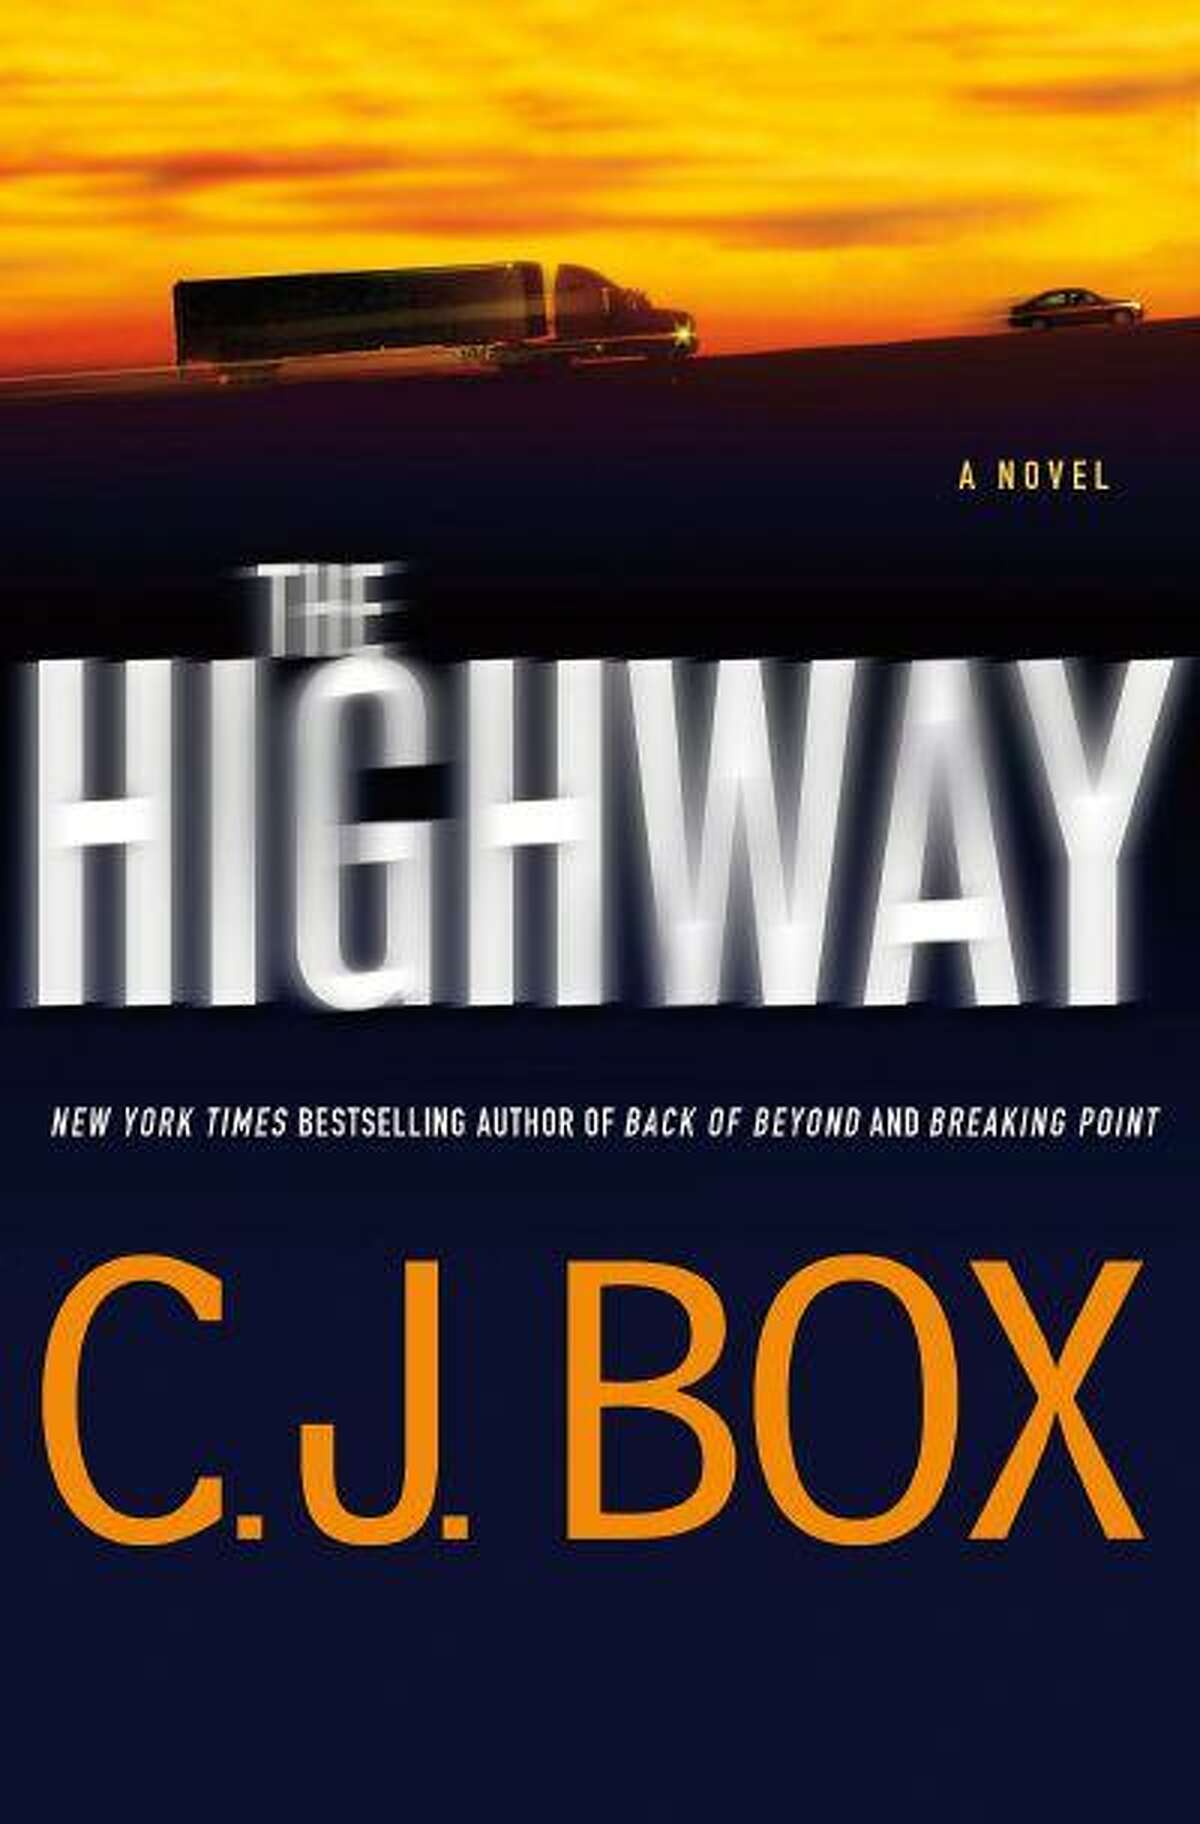 This book cover image released by Minotaur shows "The Highway," by C.J. Box. (AP Photo/Minotaur)